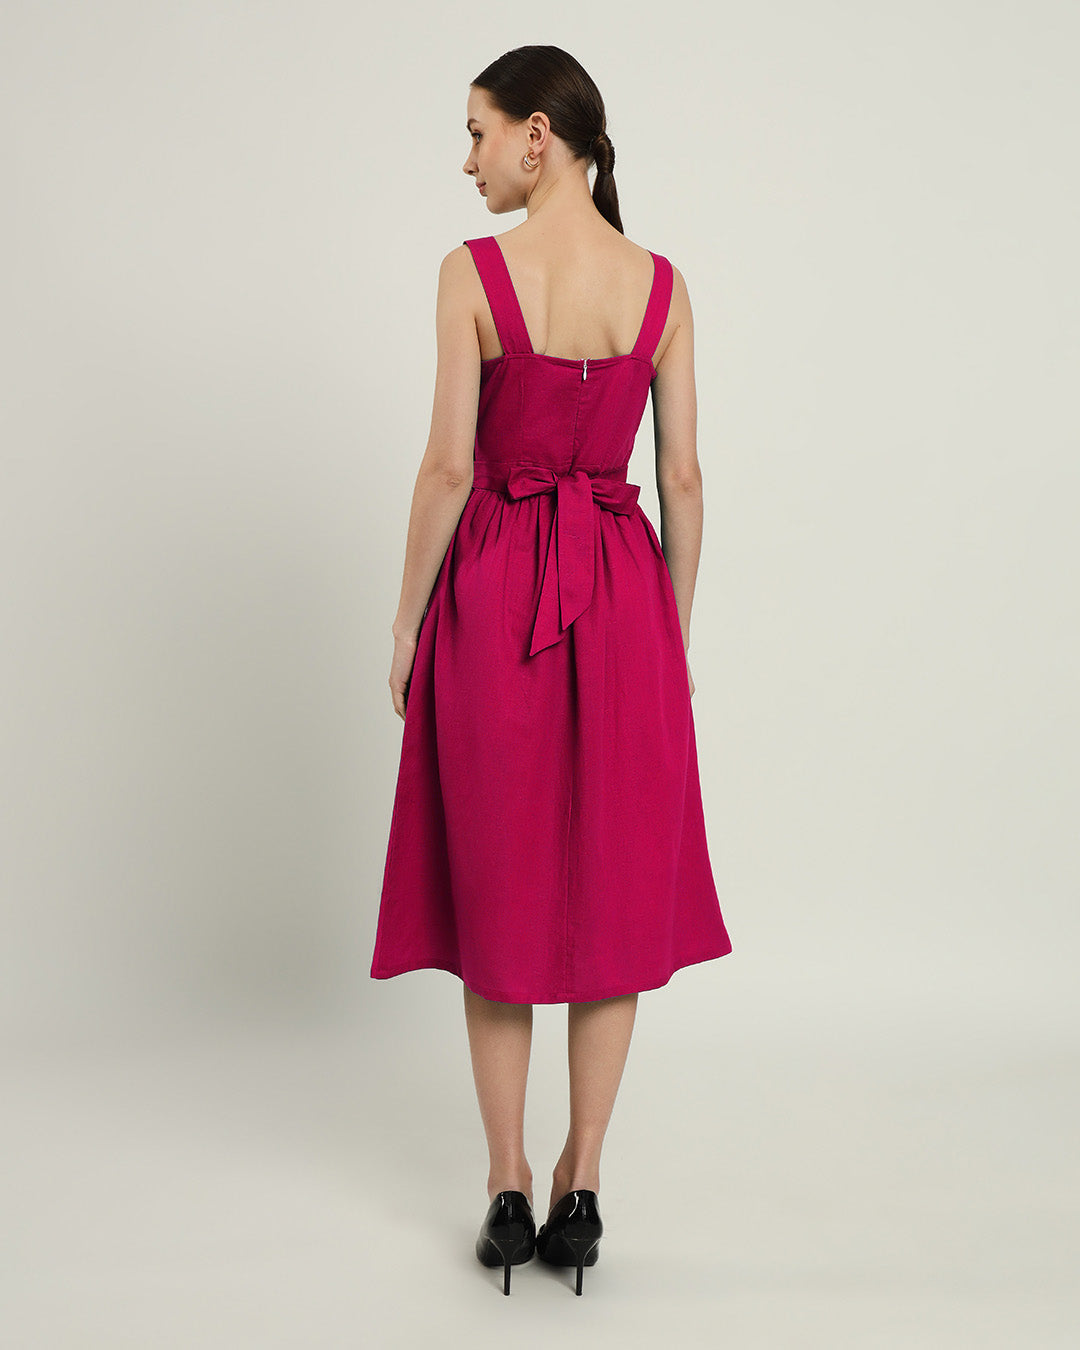 The Mihara Berry Cotton Dress